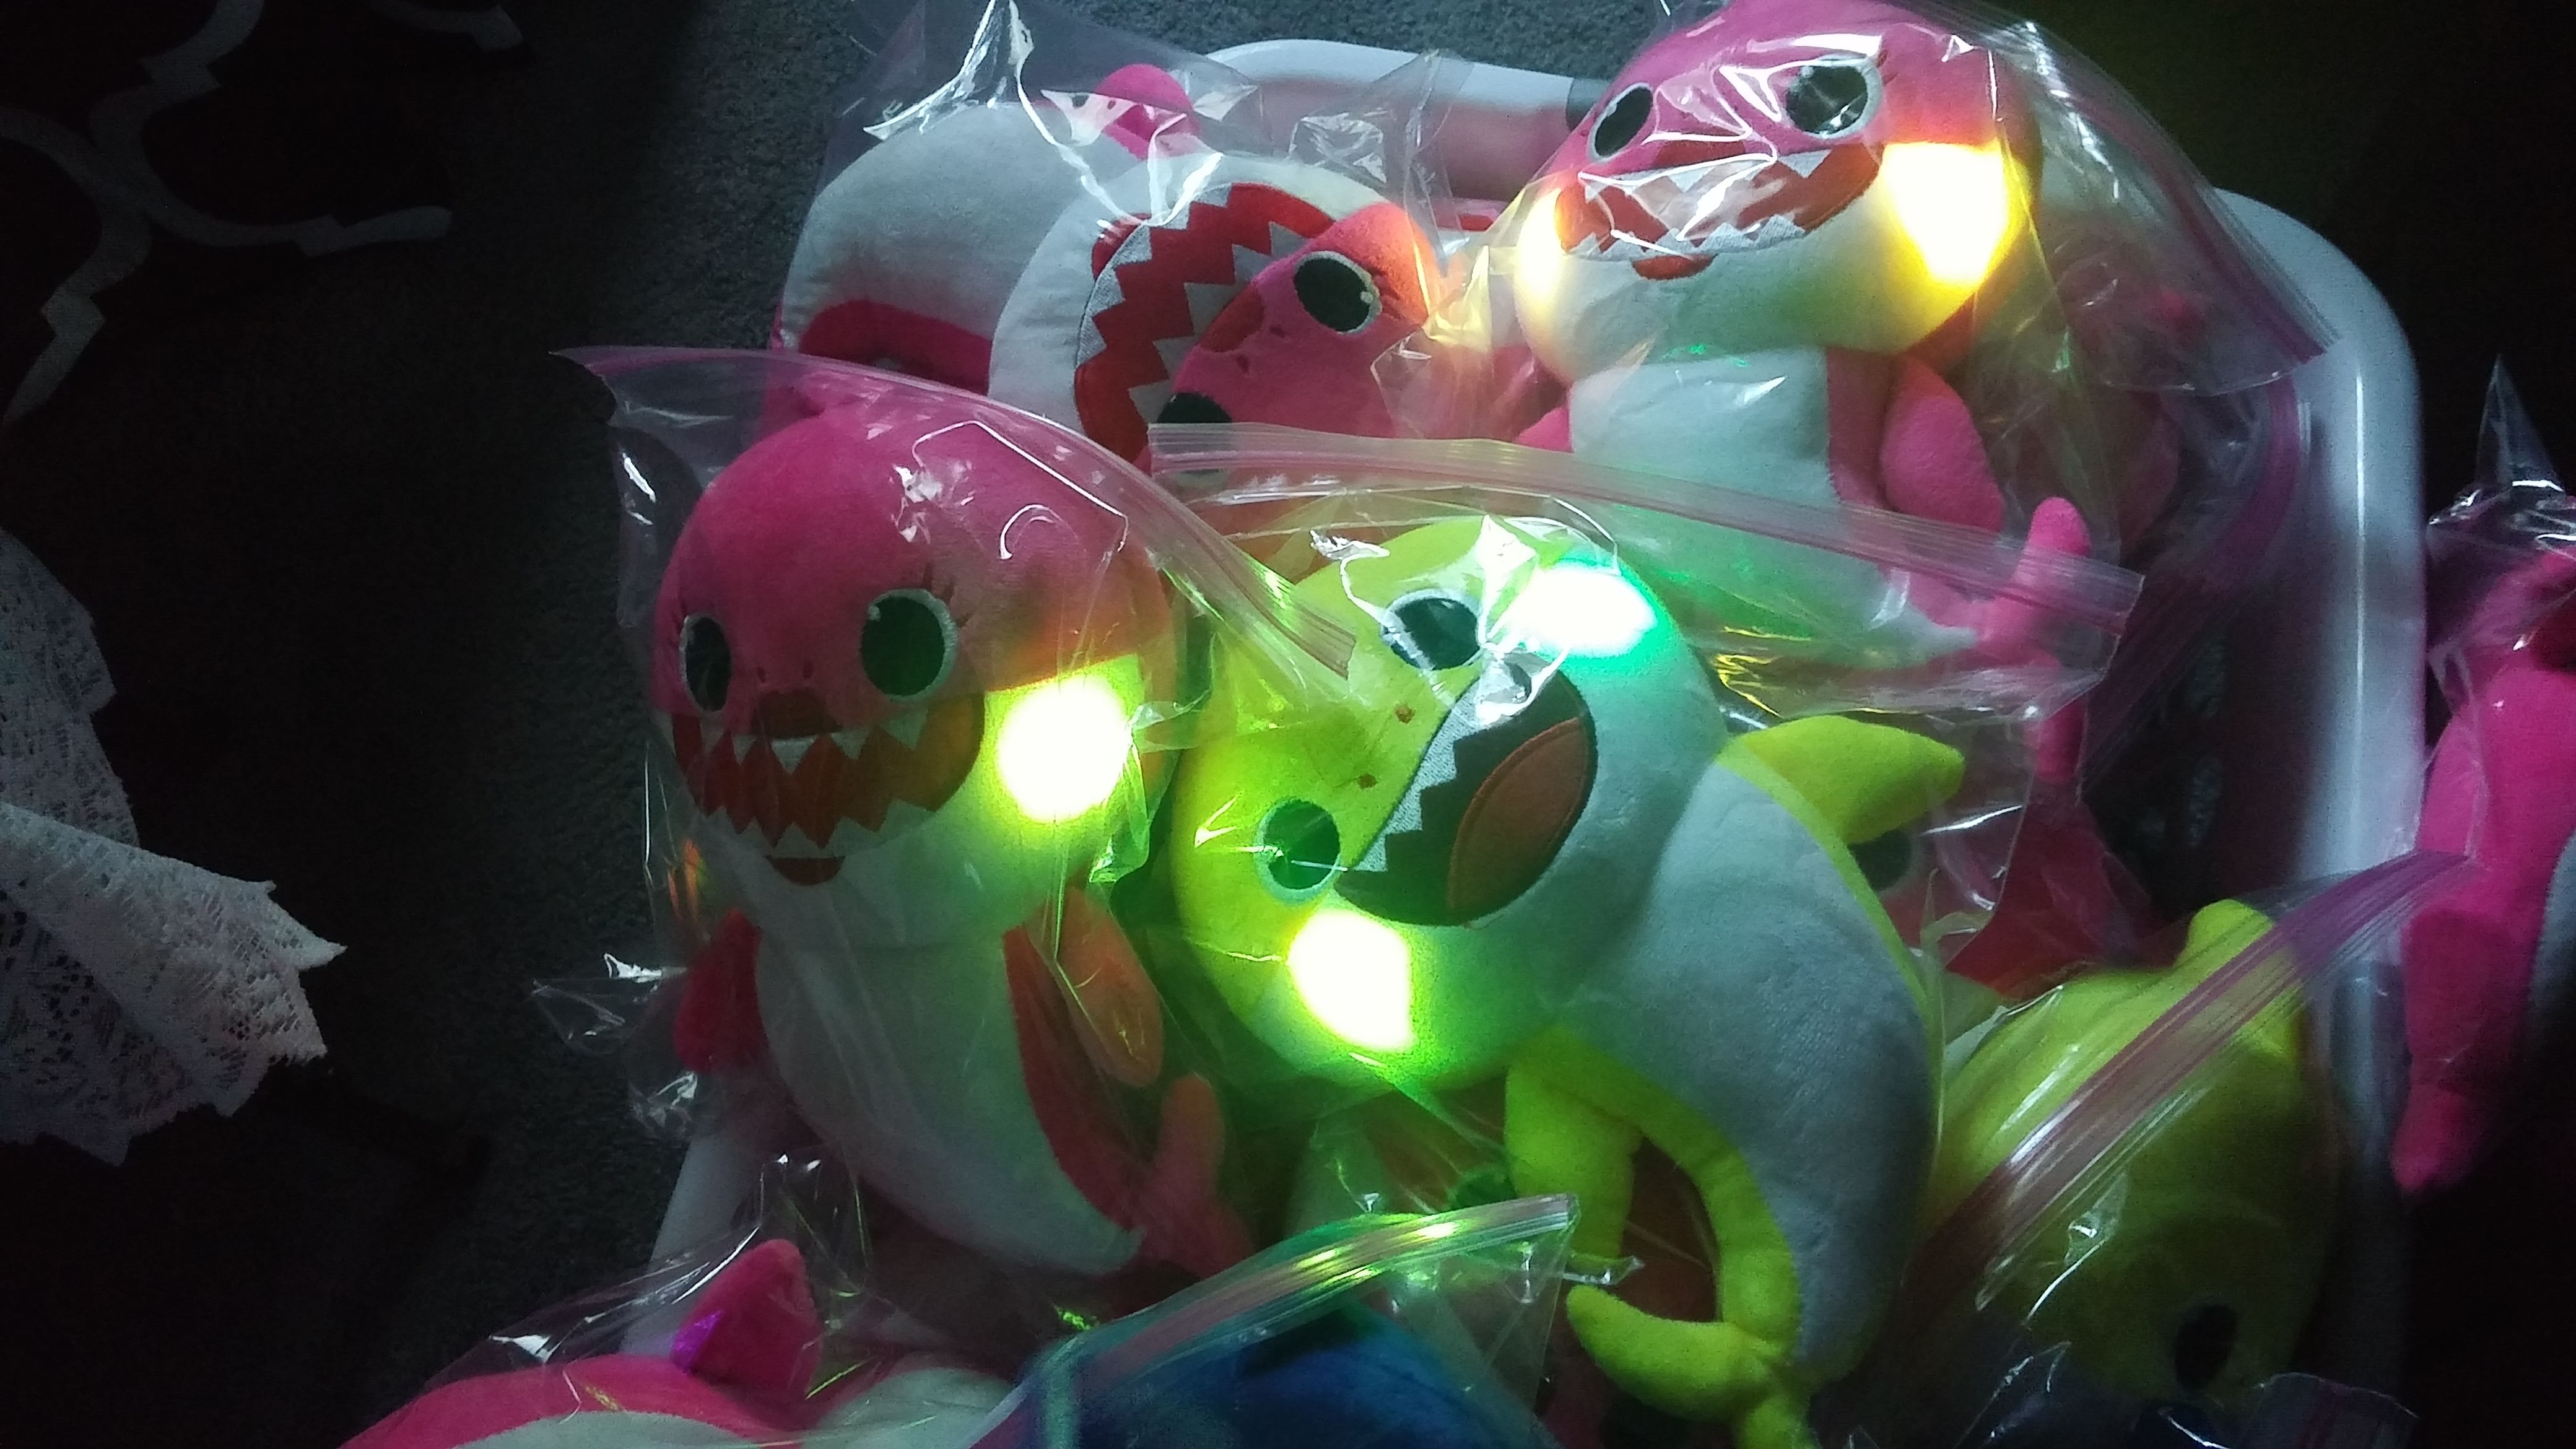 $15 each !!! 59th Ave & Peoria Area -NEW Baby Shark Plush toy plays Baby Shark & Cheeks Light up !